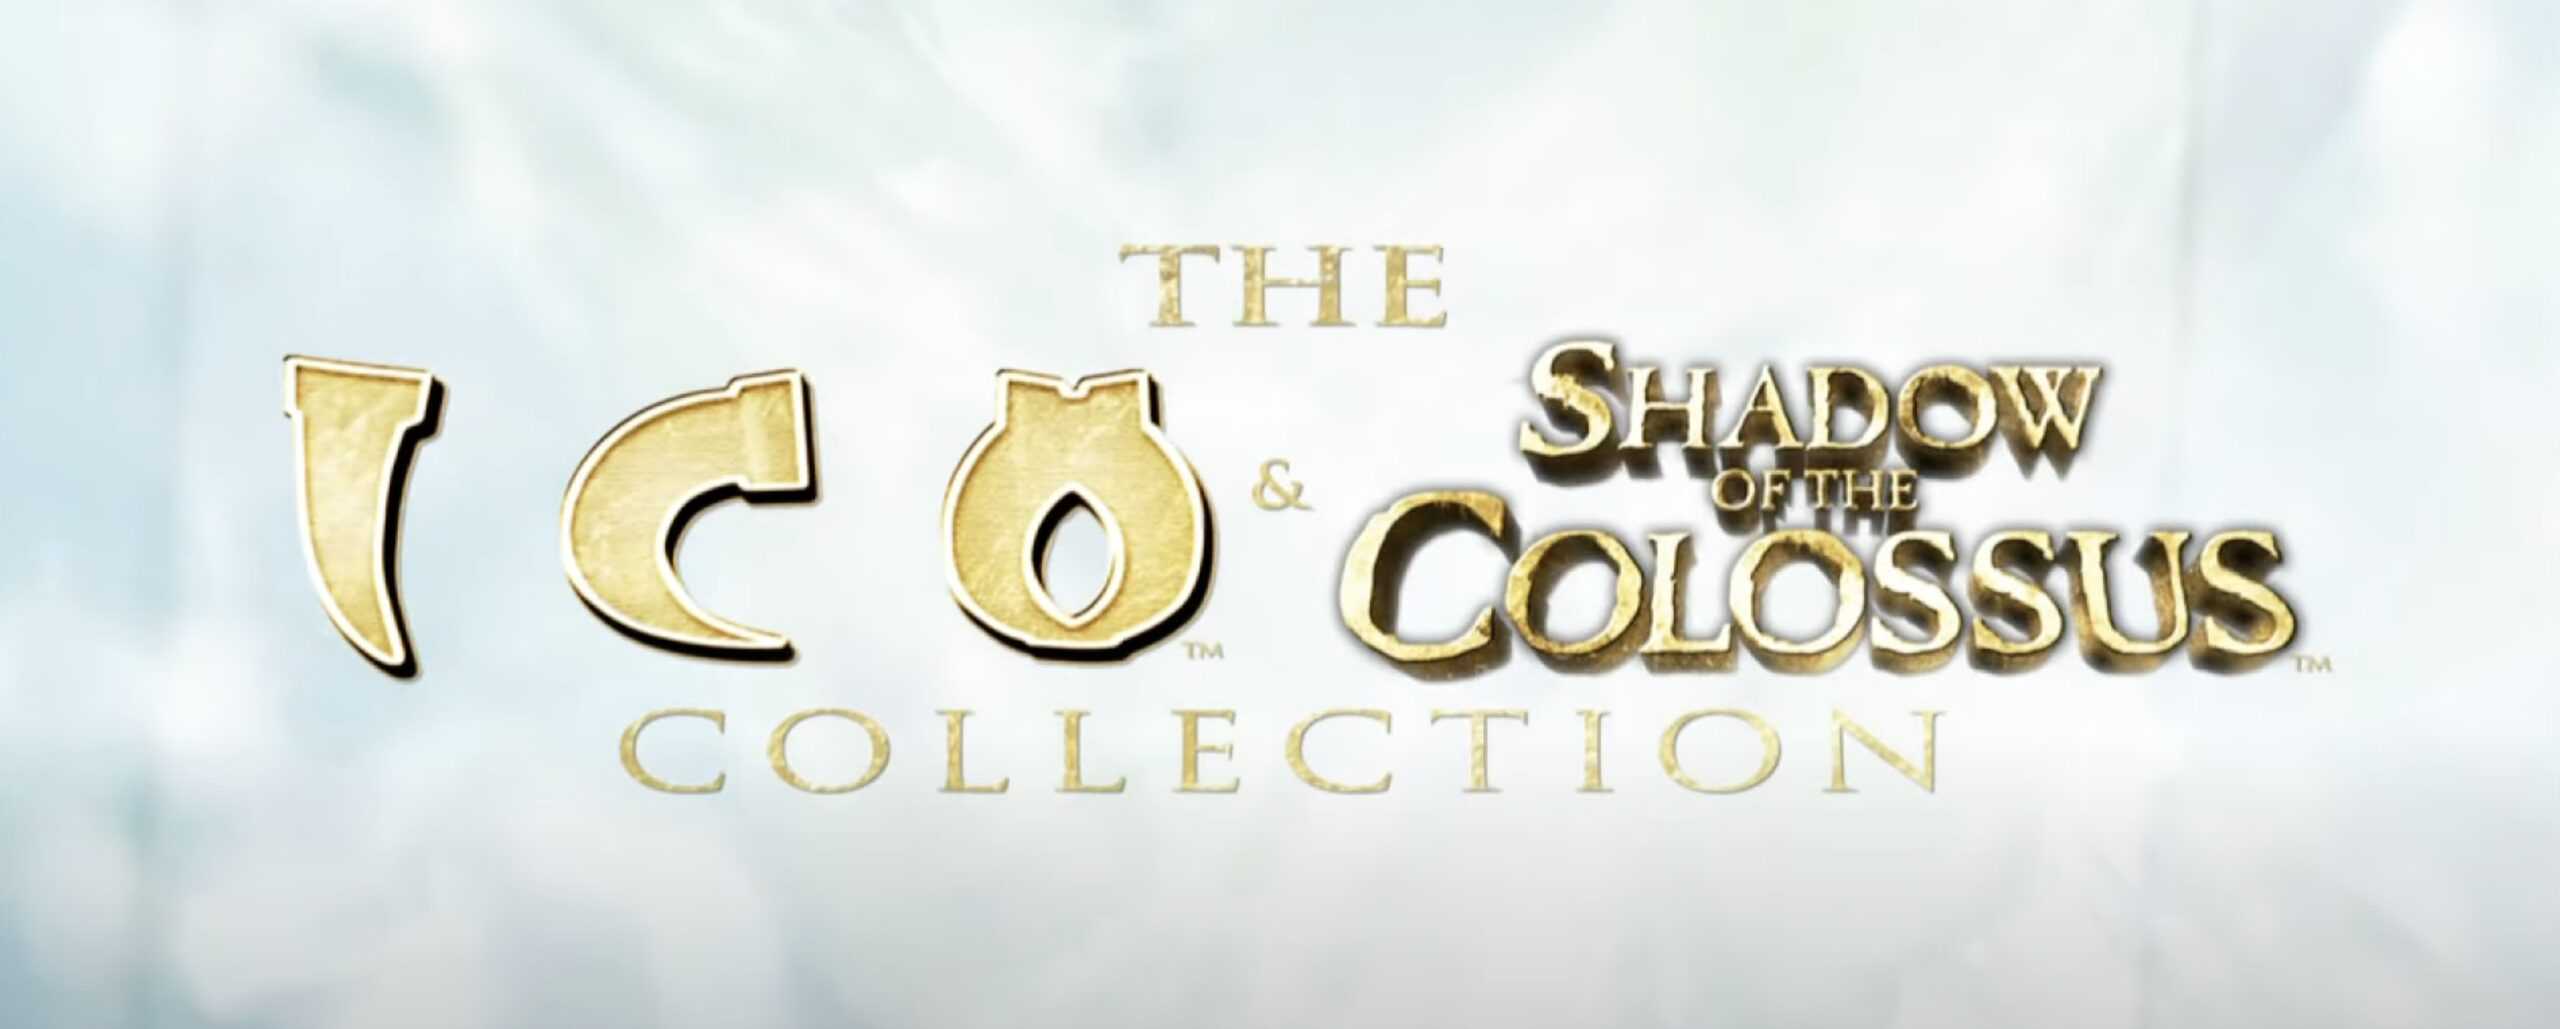 The Ico & Shadow of the Colossus Collection logo